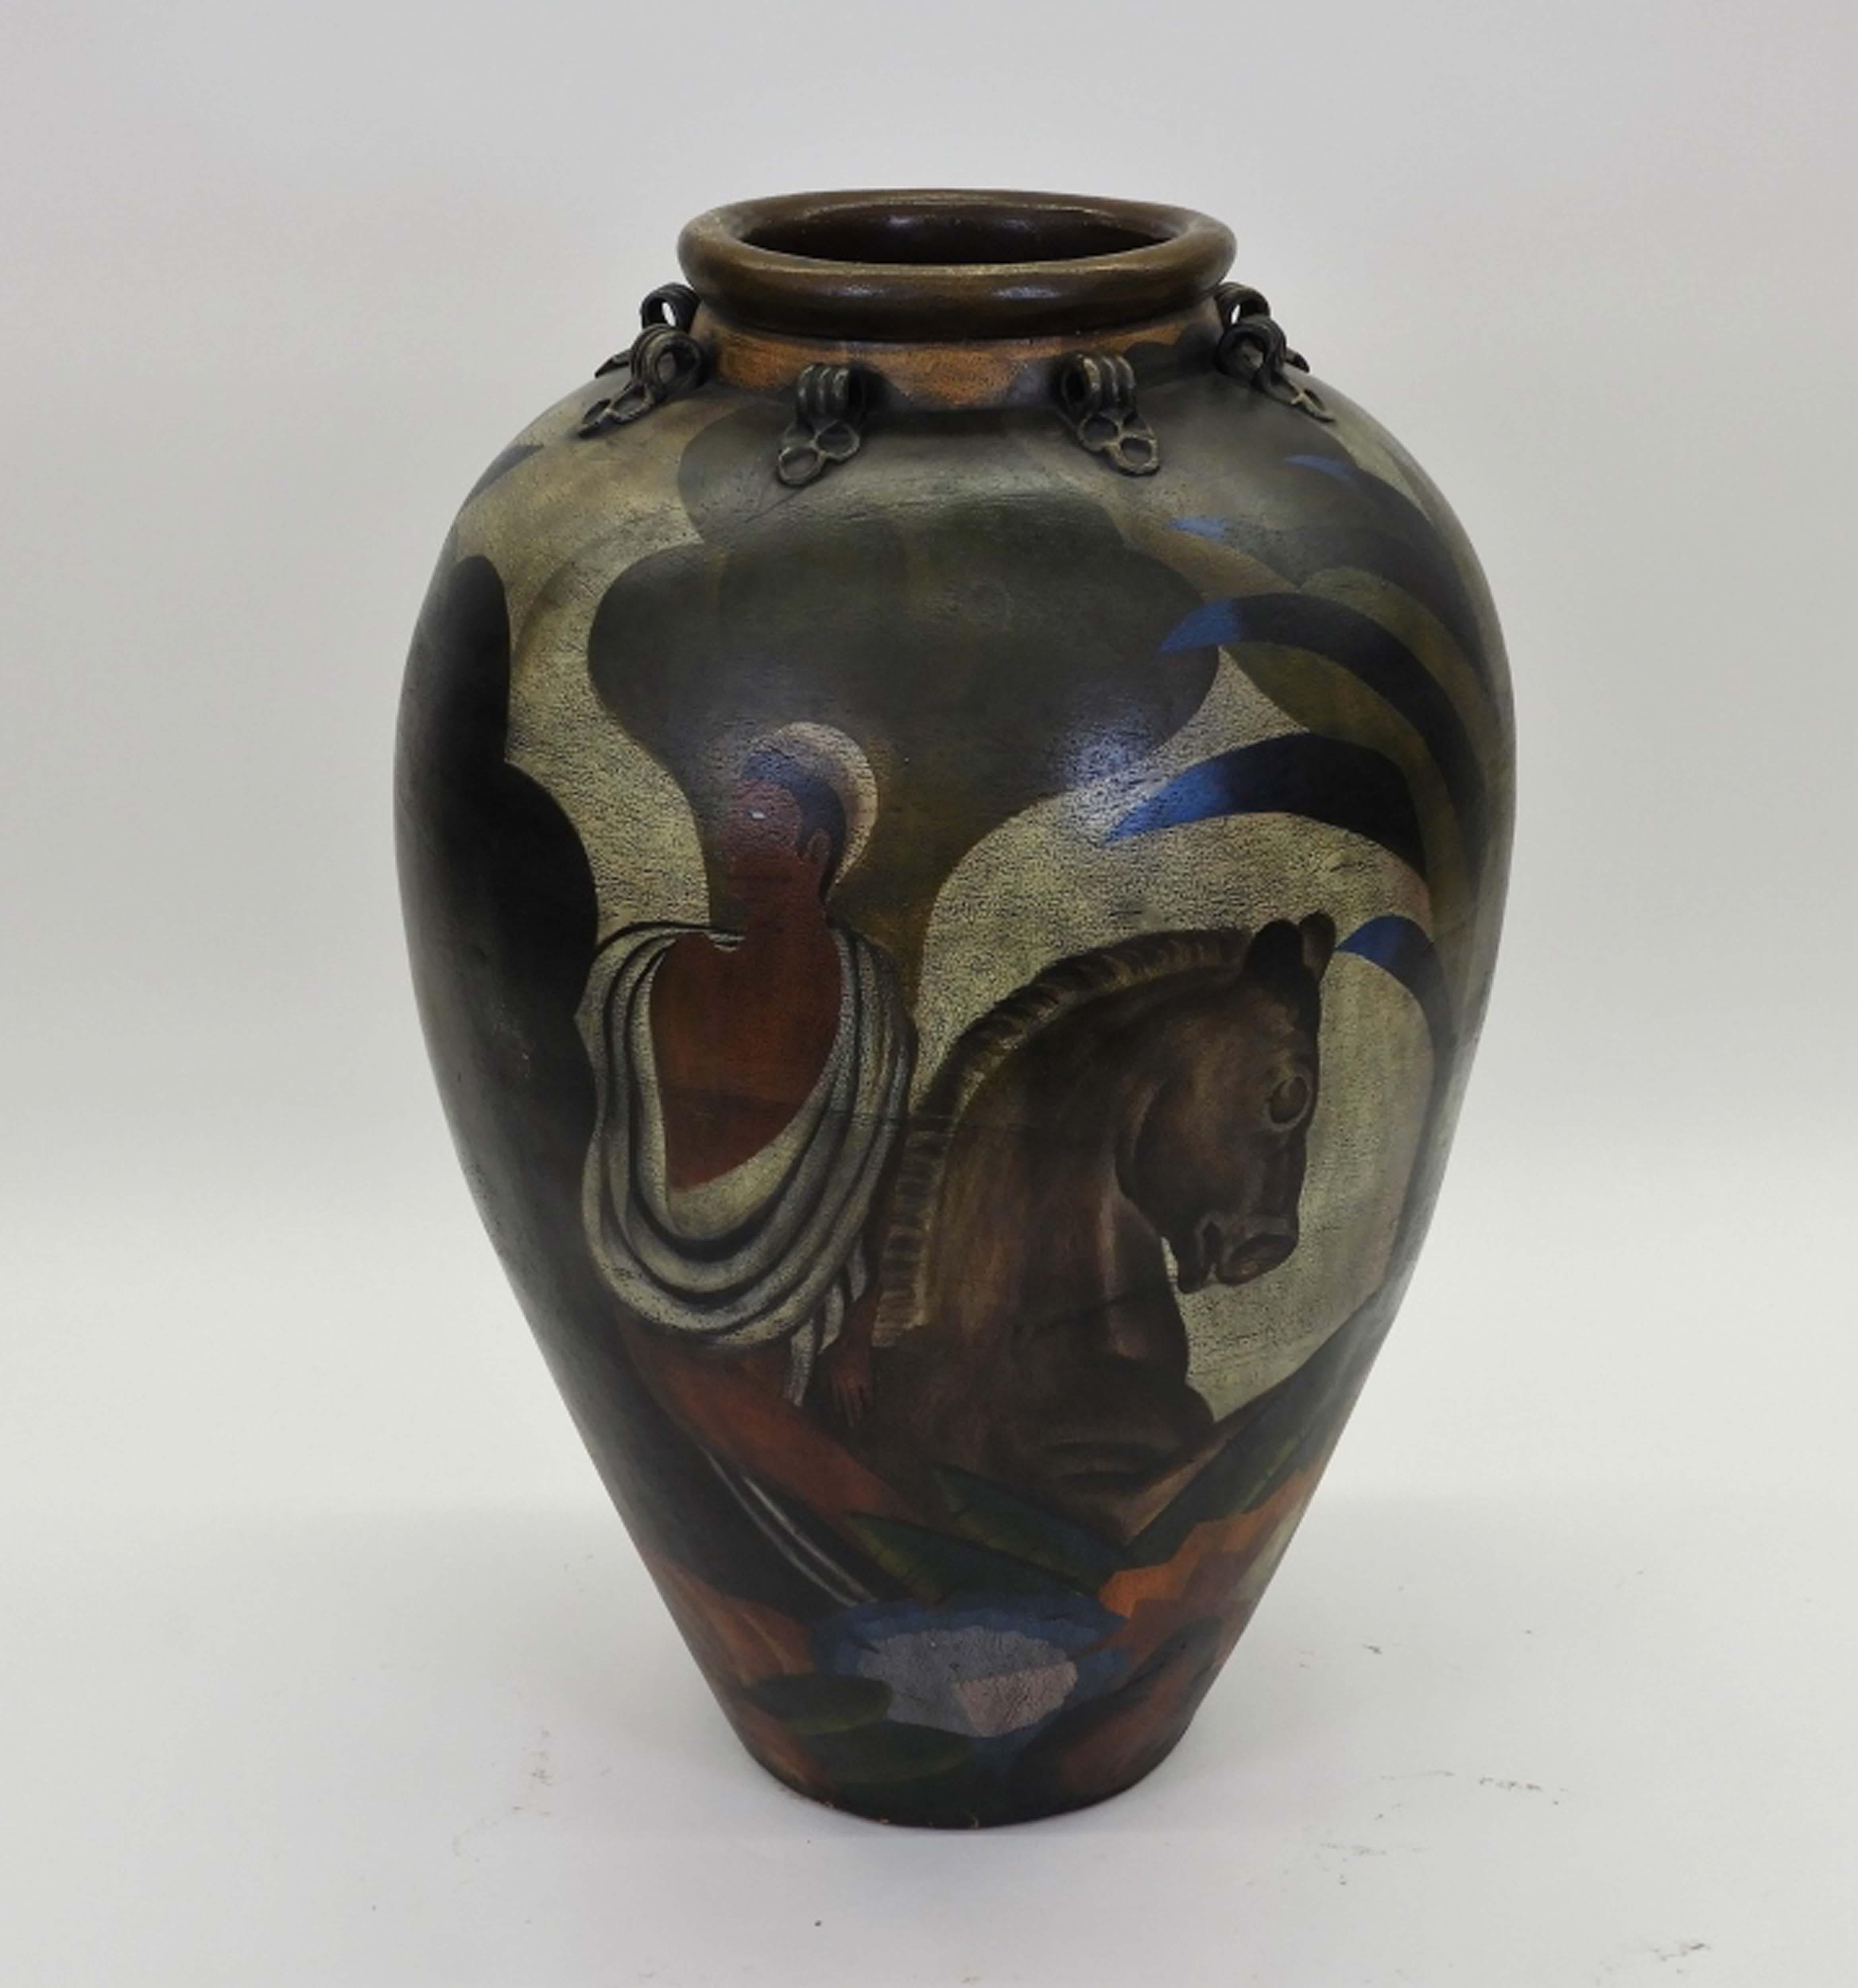 This is a massive and very heavy hand-made and hand-painted pottery vase created in the United States in the 20th century
It has a baluster form and is decorated with a landscape scene depicting a man riding a horse. 
Amazing technic to make a